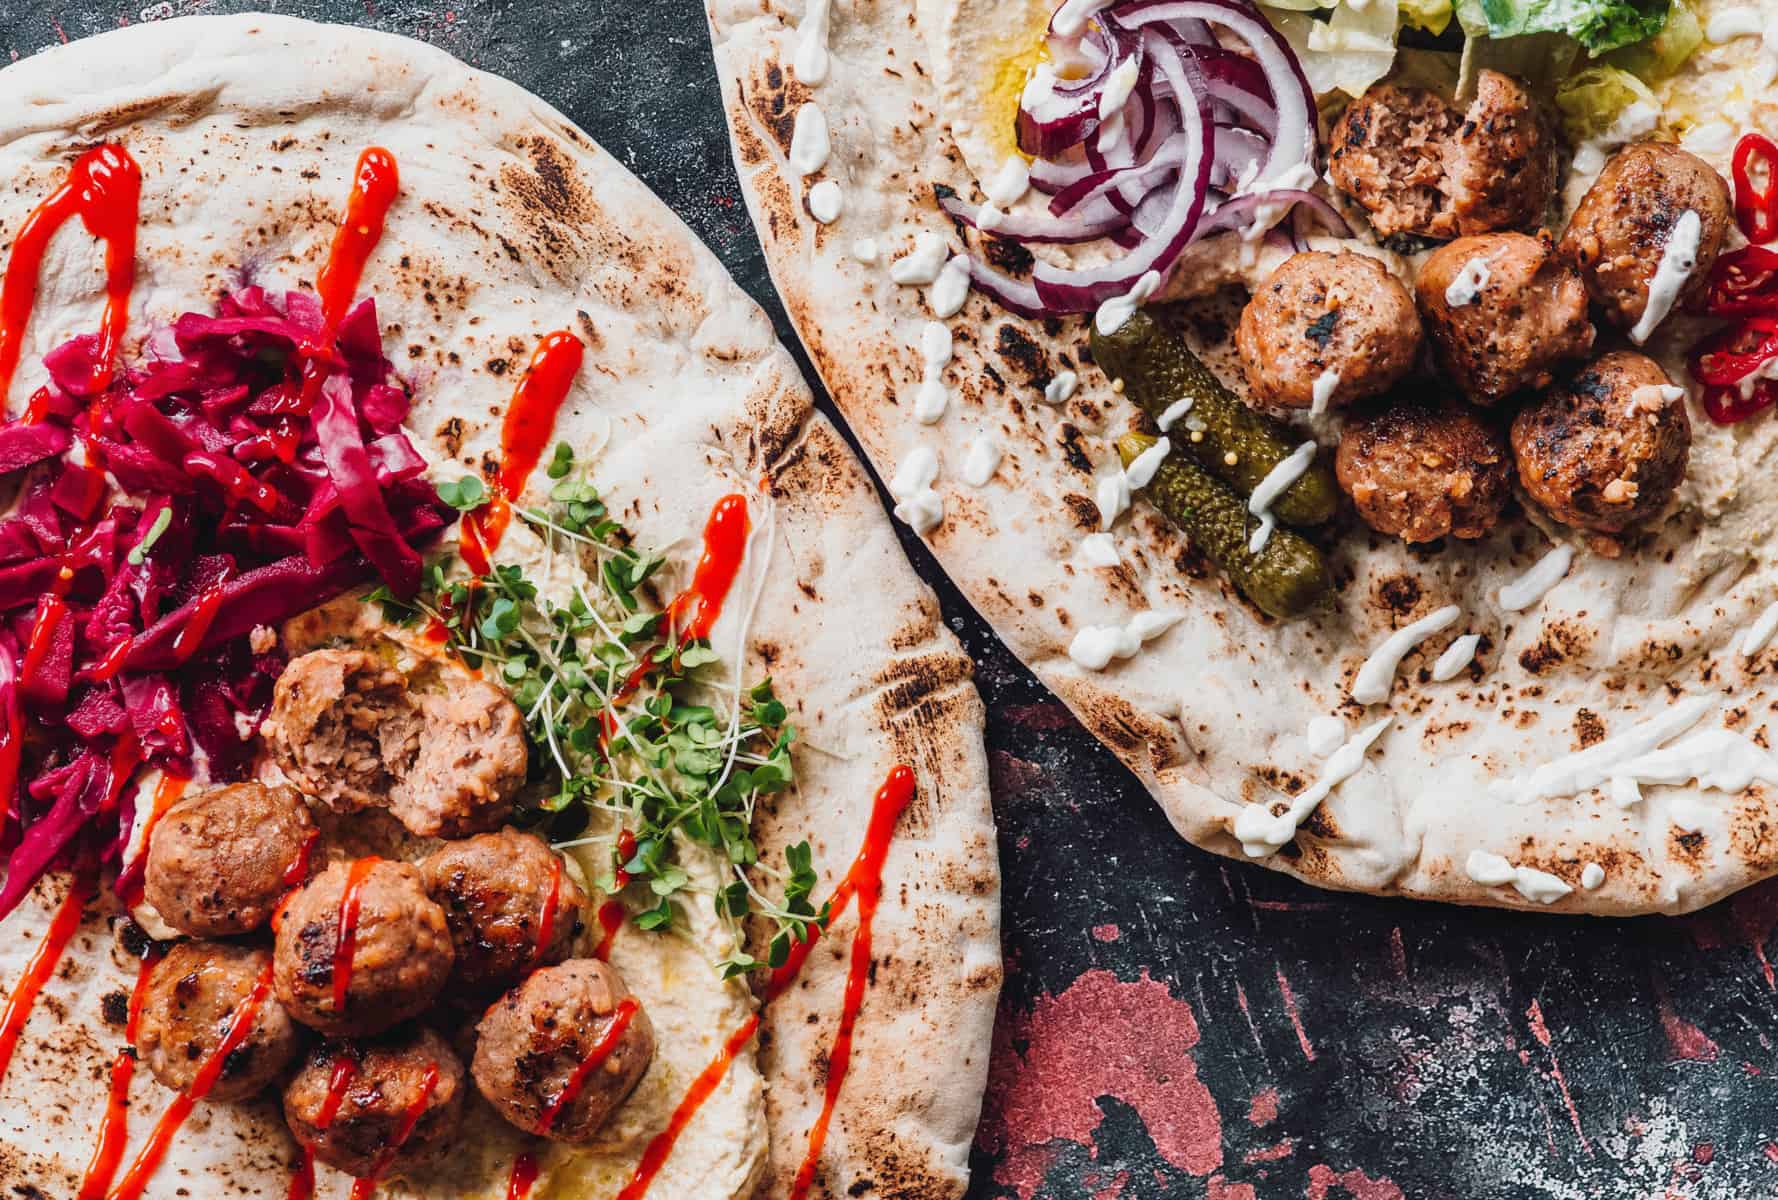 plant-based meatballs over pita bread served with onions and sauce